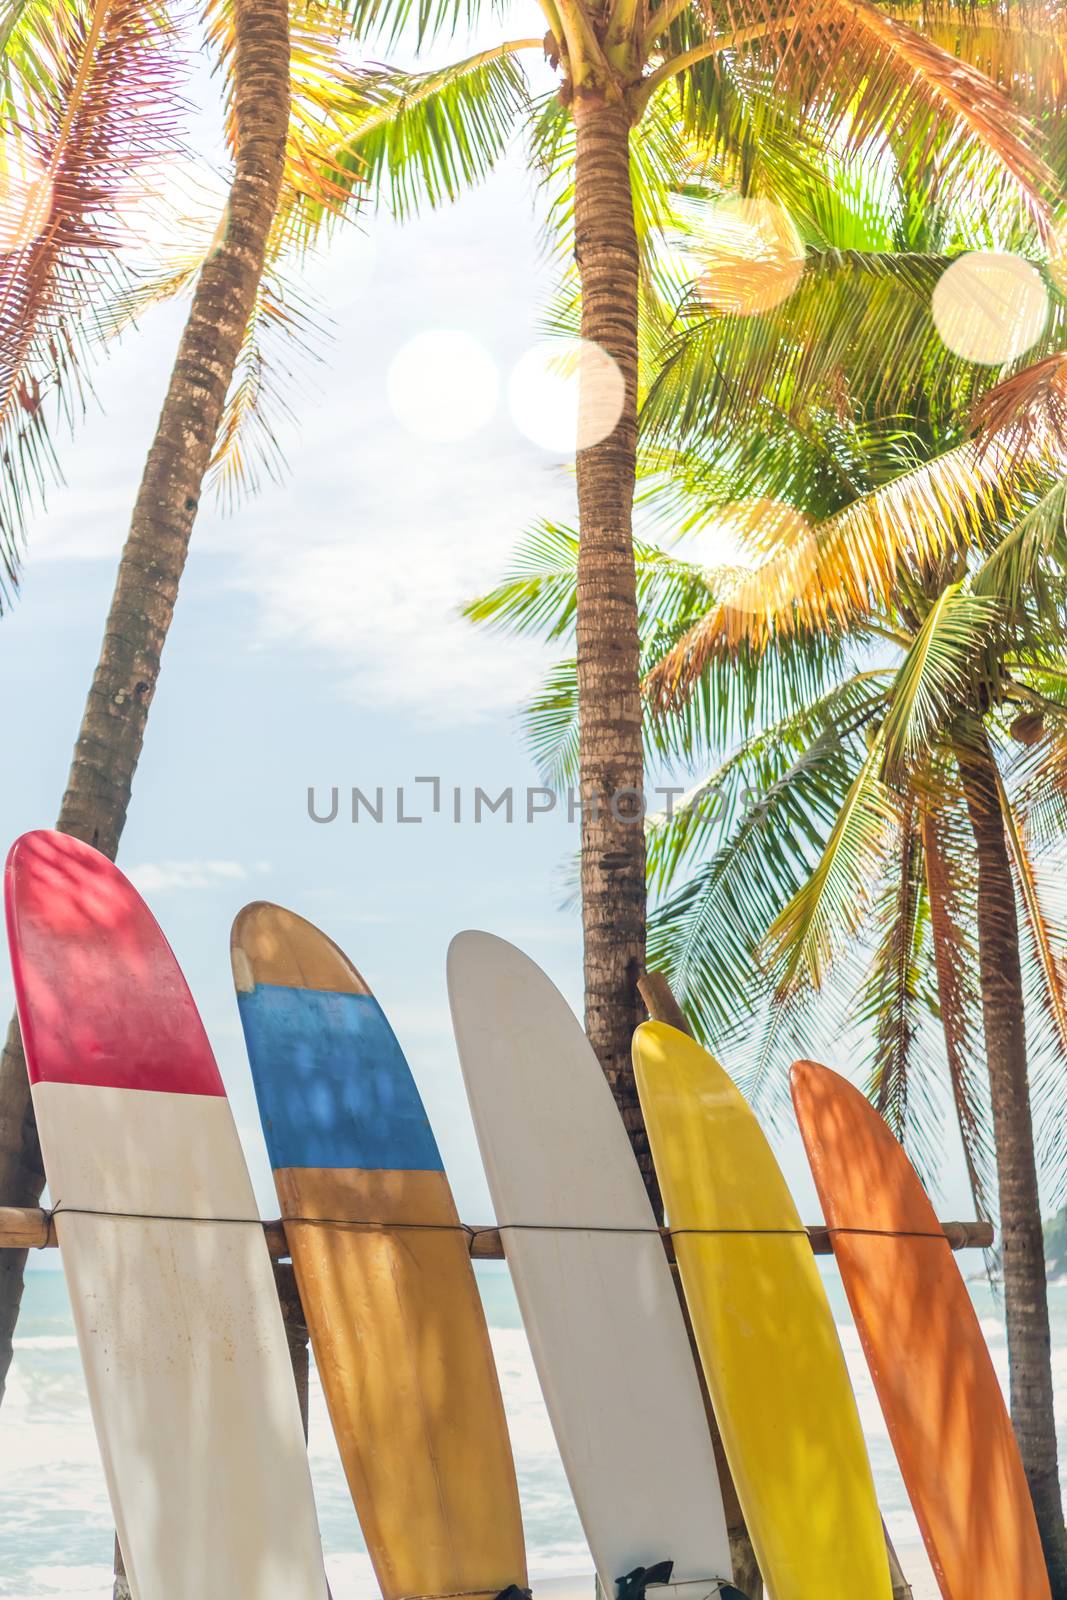 Many surfboards beside coconut trees at summer beach with sun light and blue sky background. by Suwant